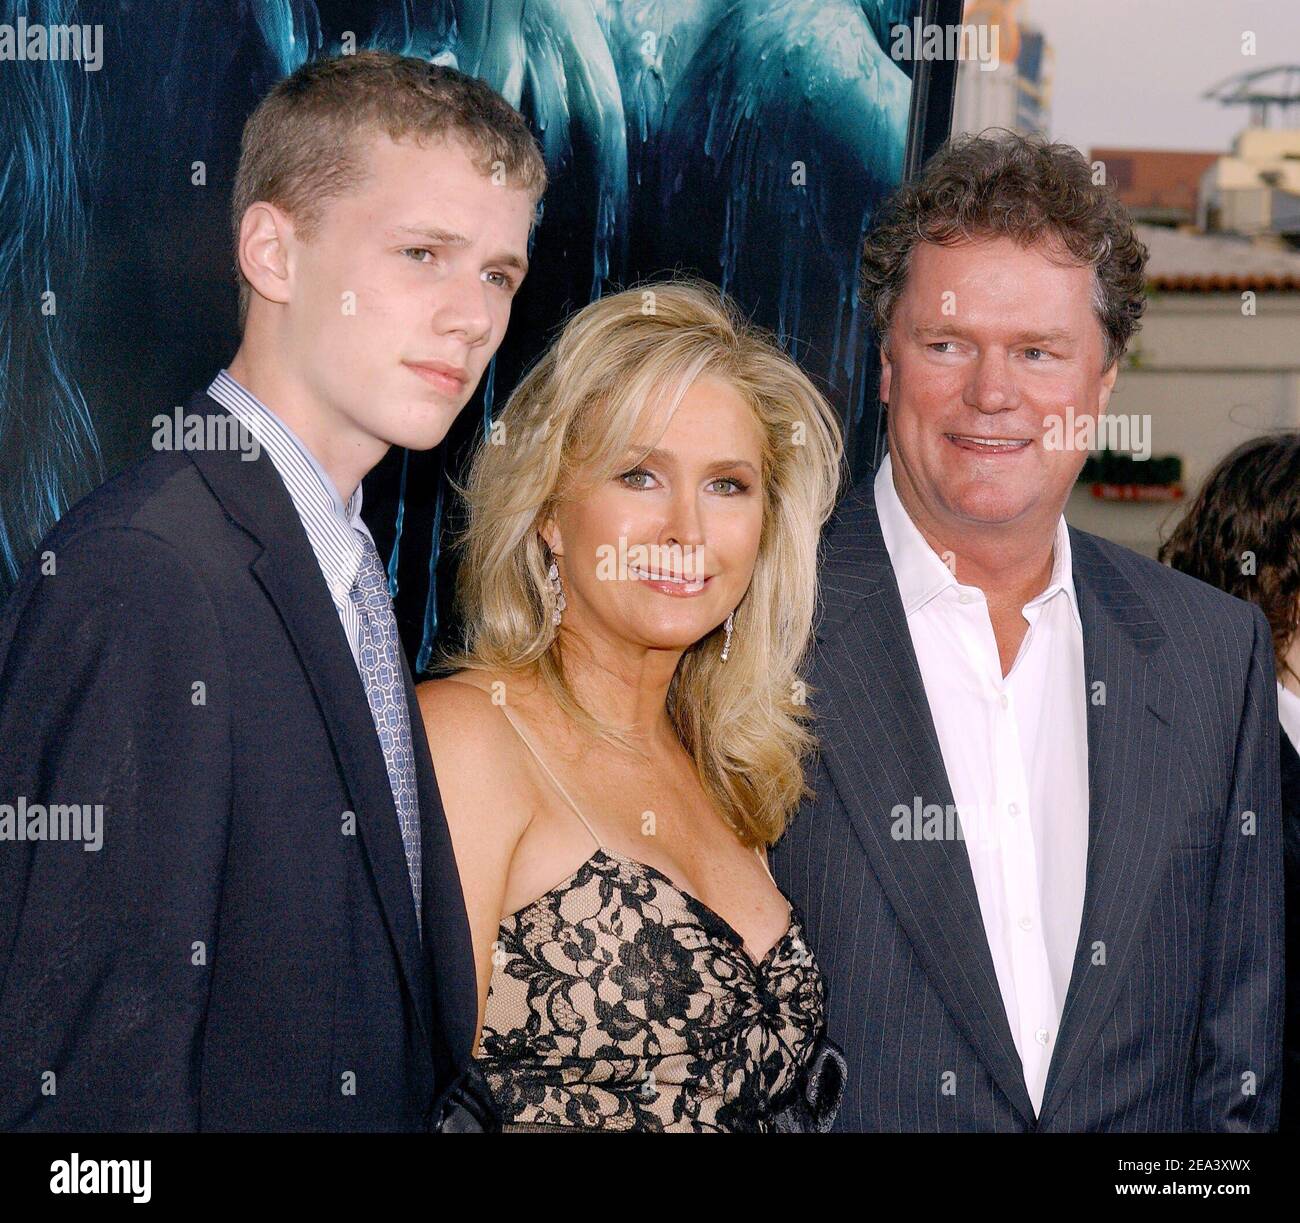 Kathy Hilton, Rick Hilton and Baron Hilton attend the premiere of the 'House of Wax' at the Mann Village Theatre in Westwood, Los Angeles, CA, USA, on April 26, 2005. Photo by Lionel Hahn/ABACA. Stock Photo